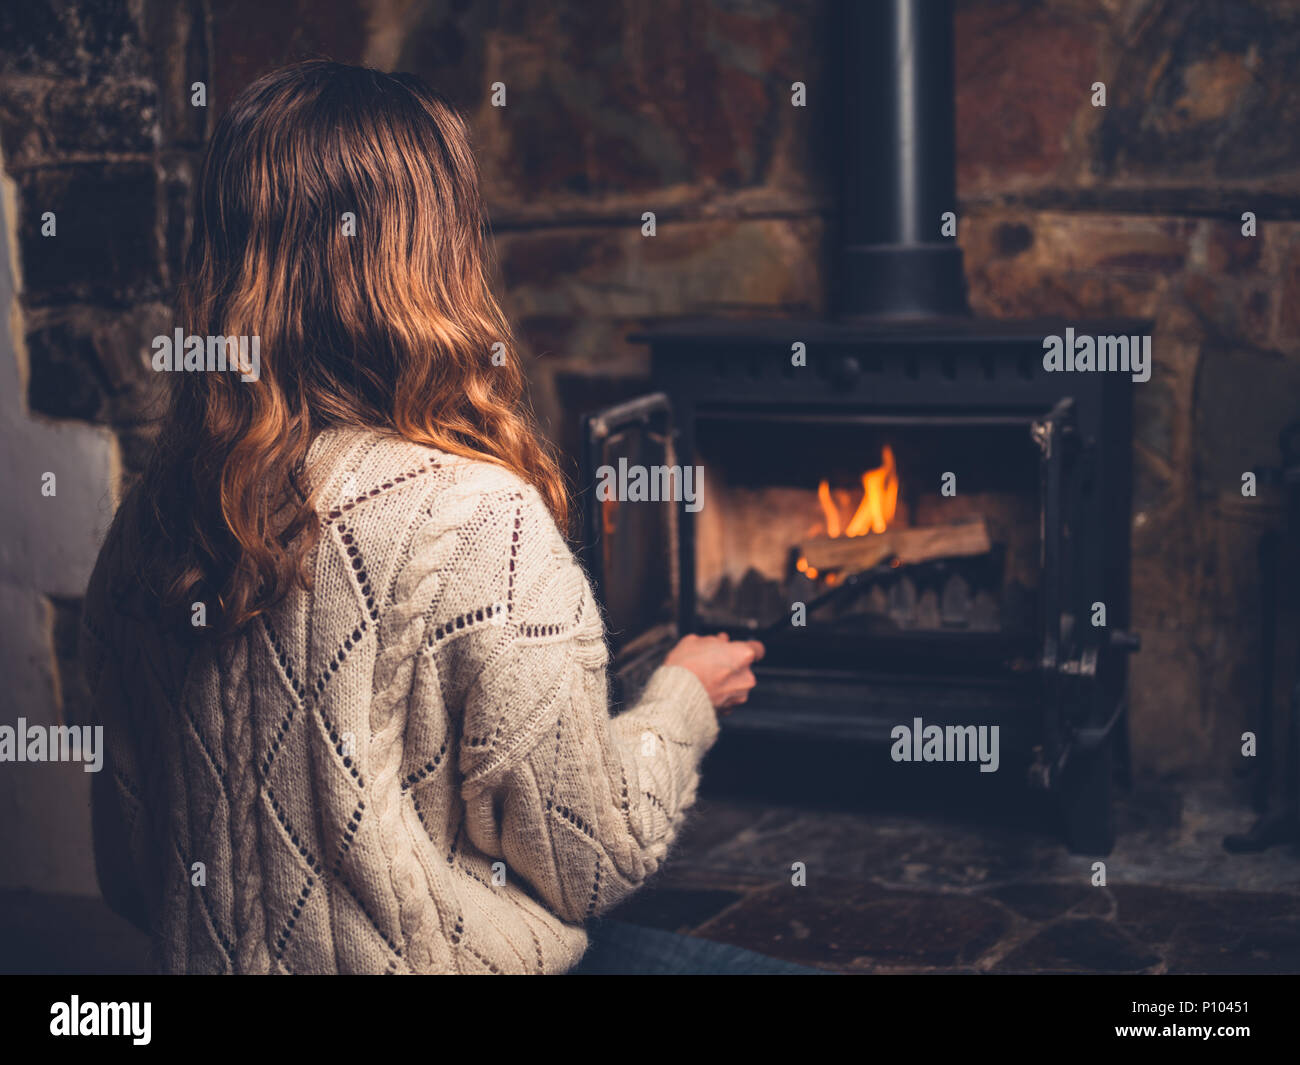 A young woman is poking a fire in a log burner Stock Photo